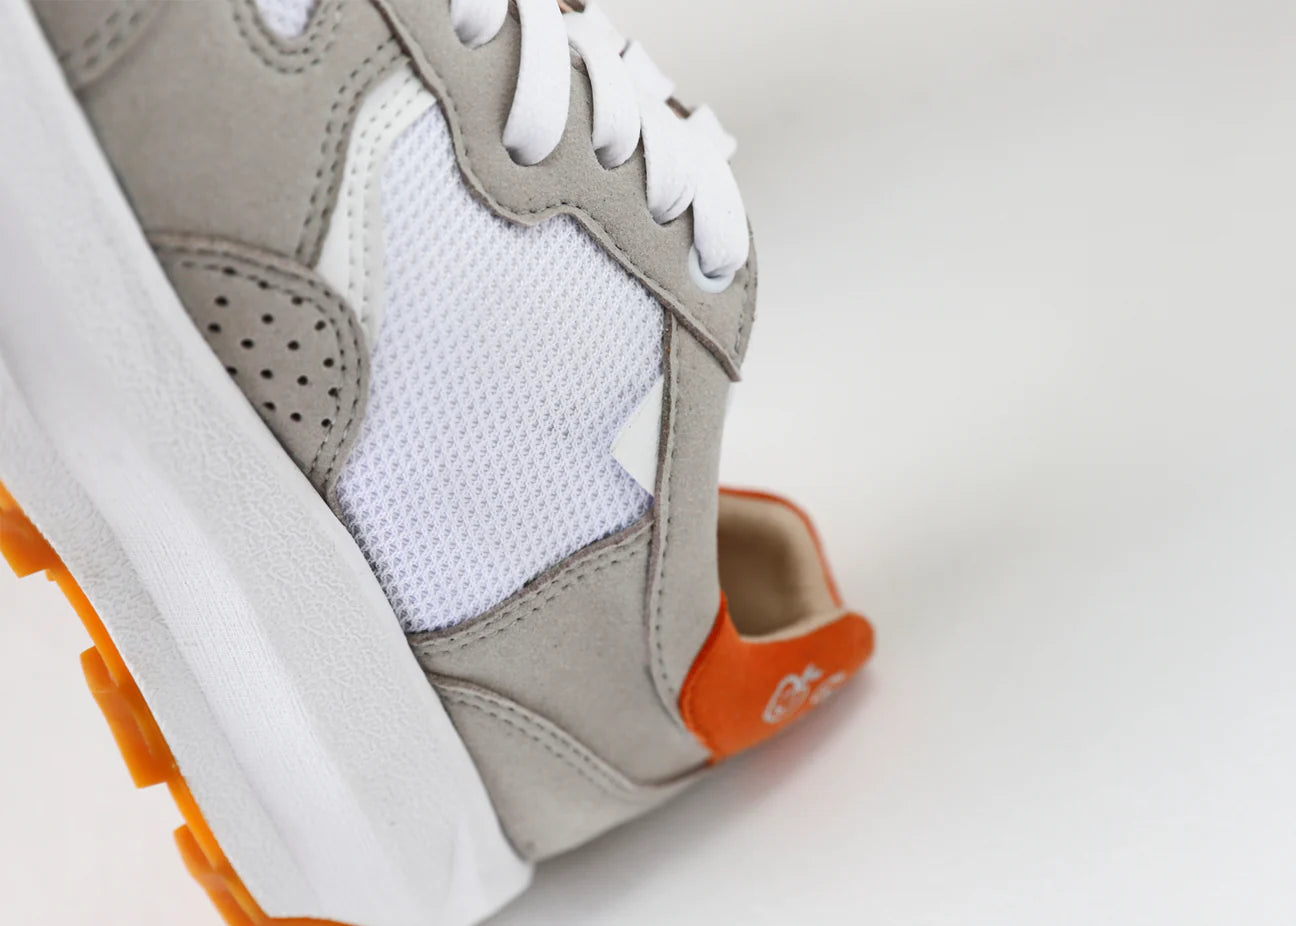 Baber Sneakers "grey orange" | Good Guys Don't Wear Leather